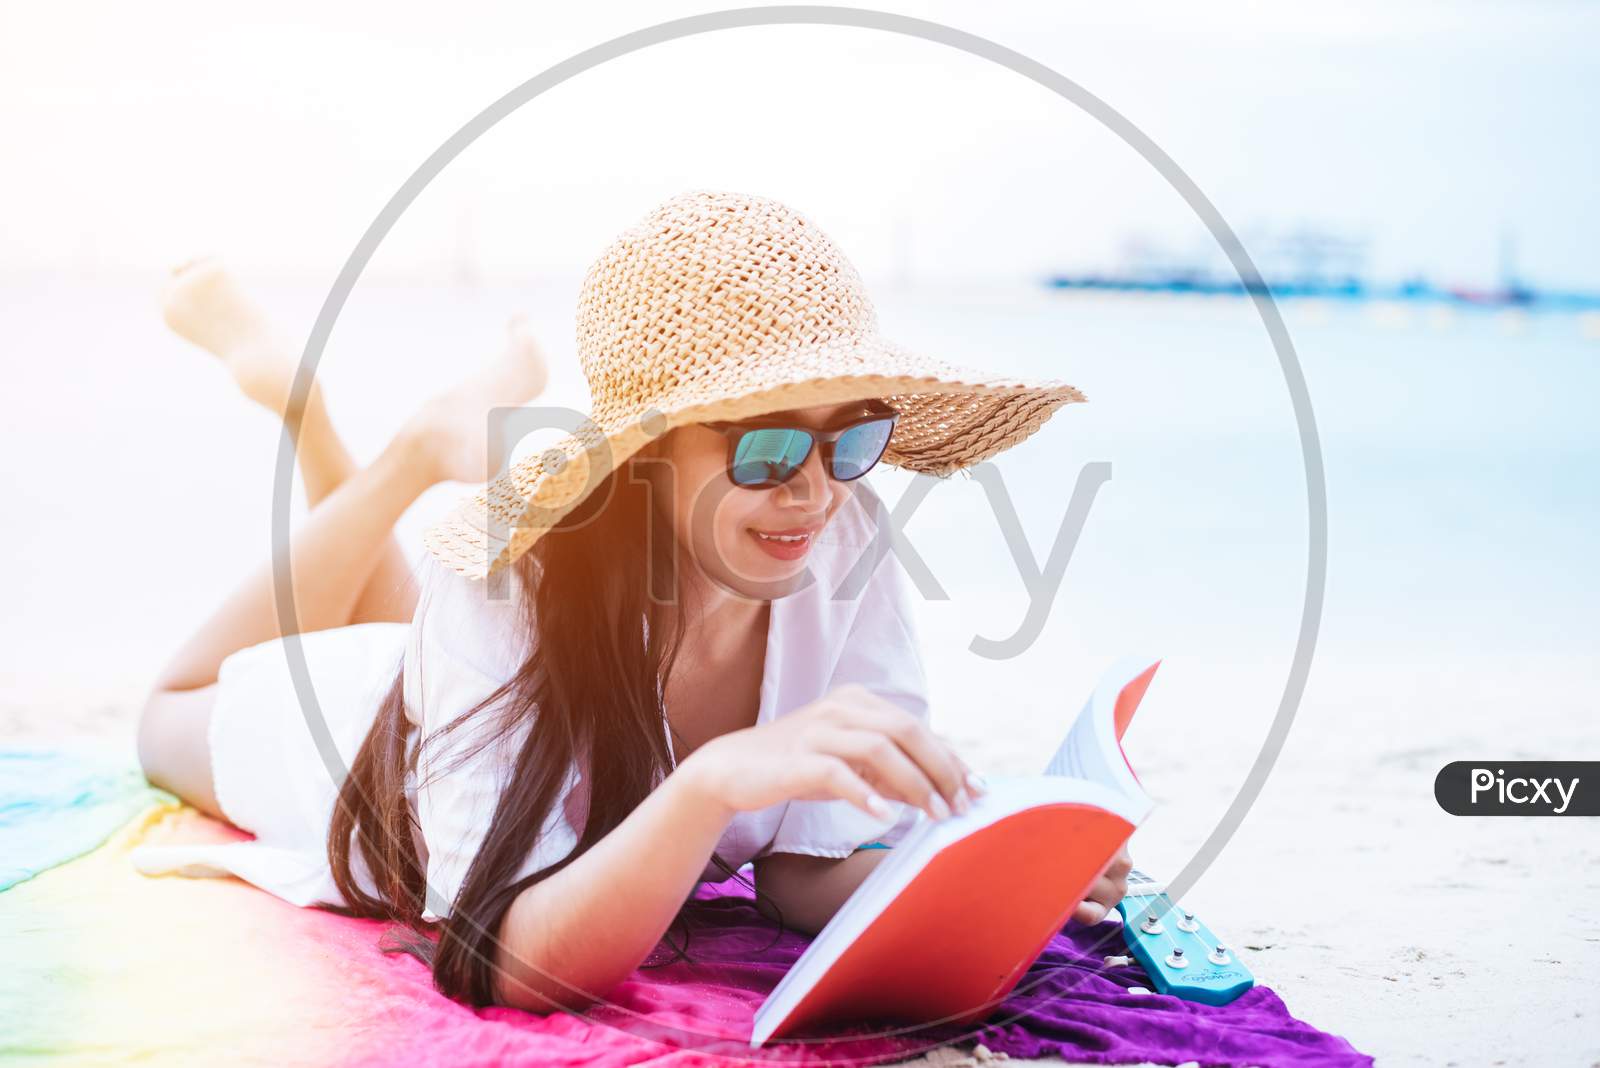 Beauty Asian Woman Have Vacation On Beach. Girl Wearing Wing Hat And Reading Book On Colorful Mat Near Sea. Lifestyle And Happy Life Concept. Travel And Holiday Theme.